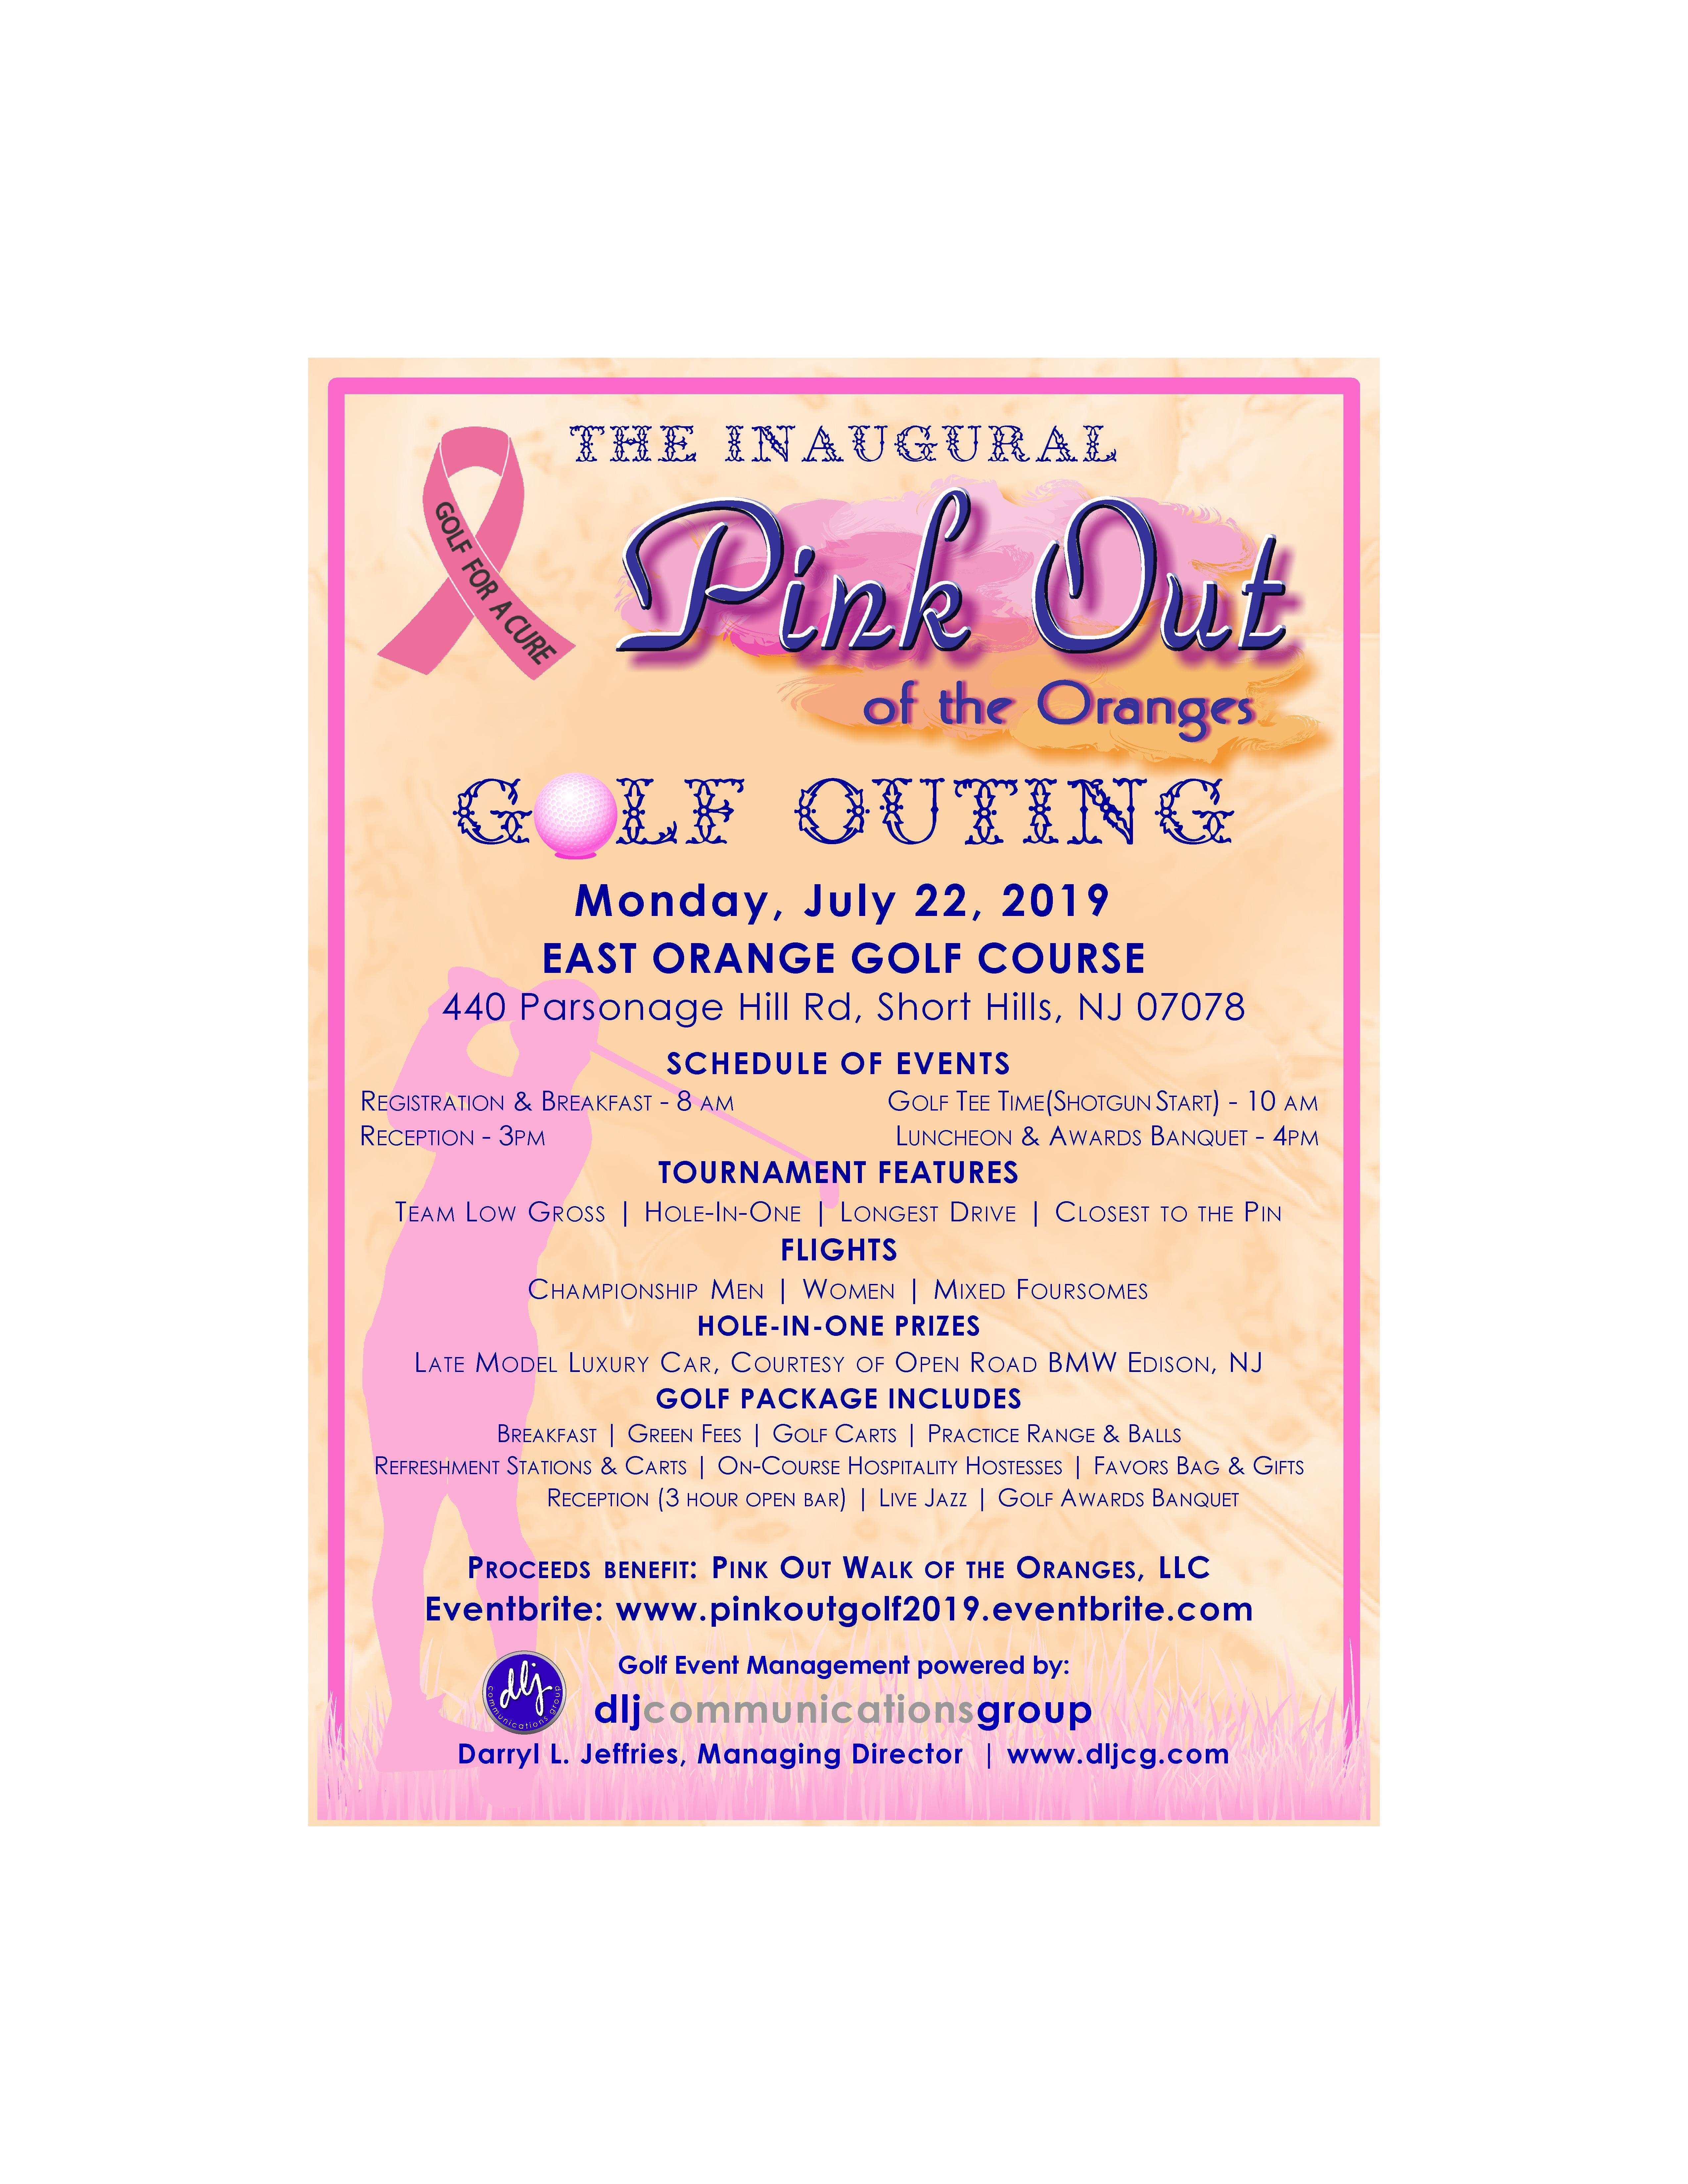 The Inaugural Pink Out Golf Outing